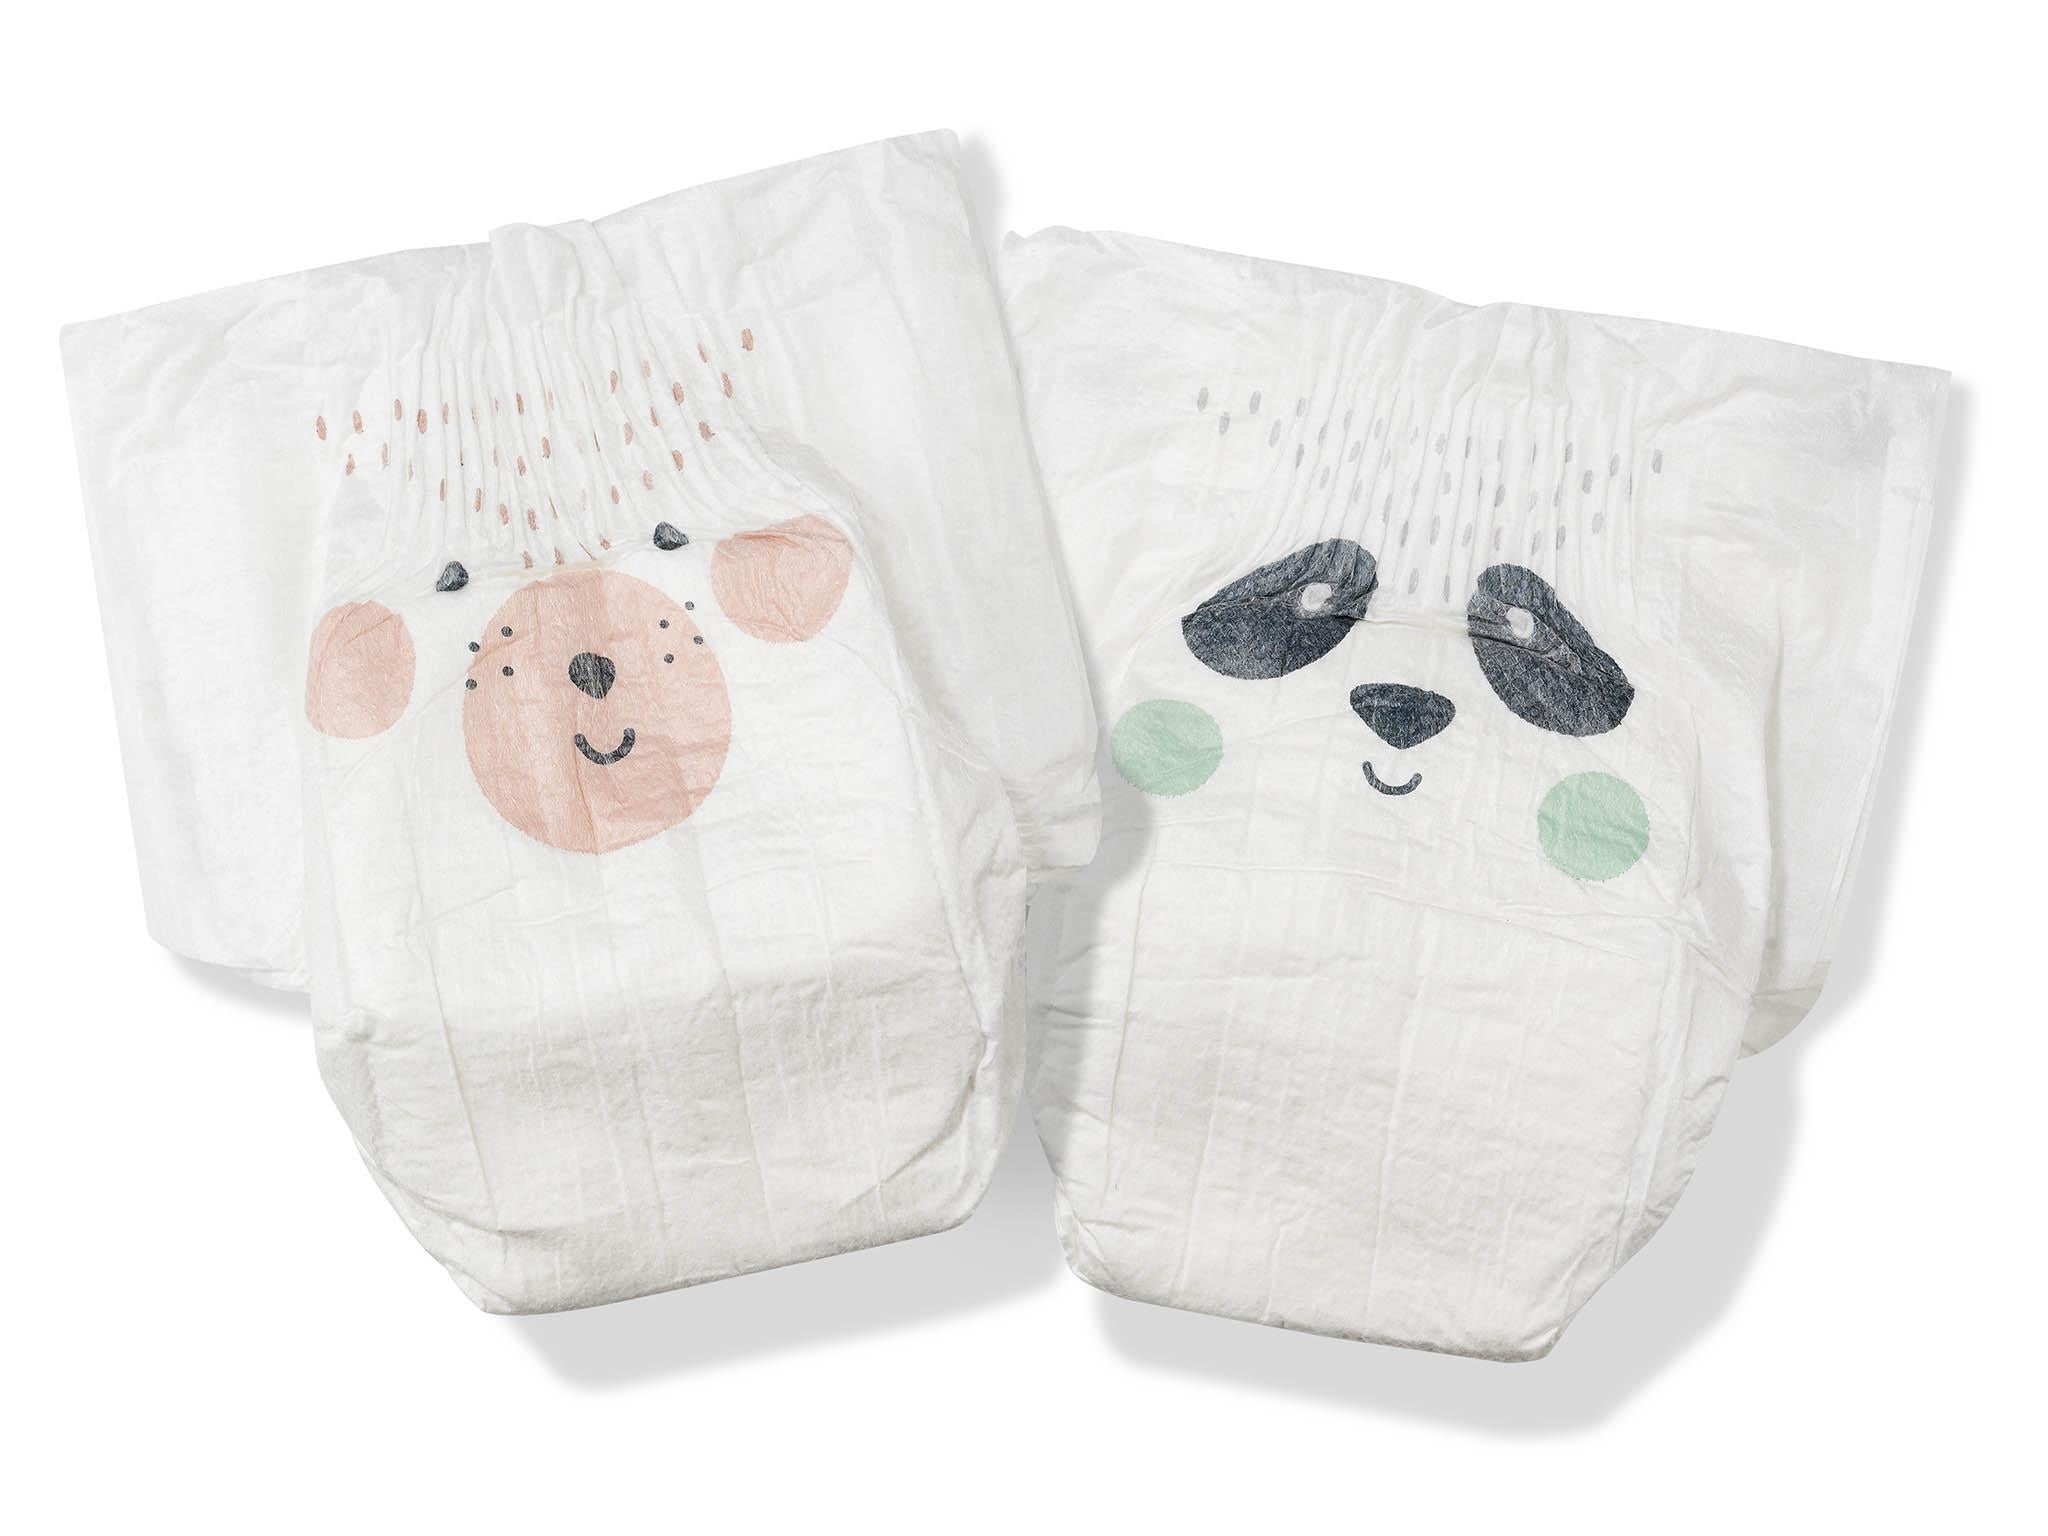 compostable nappies